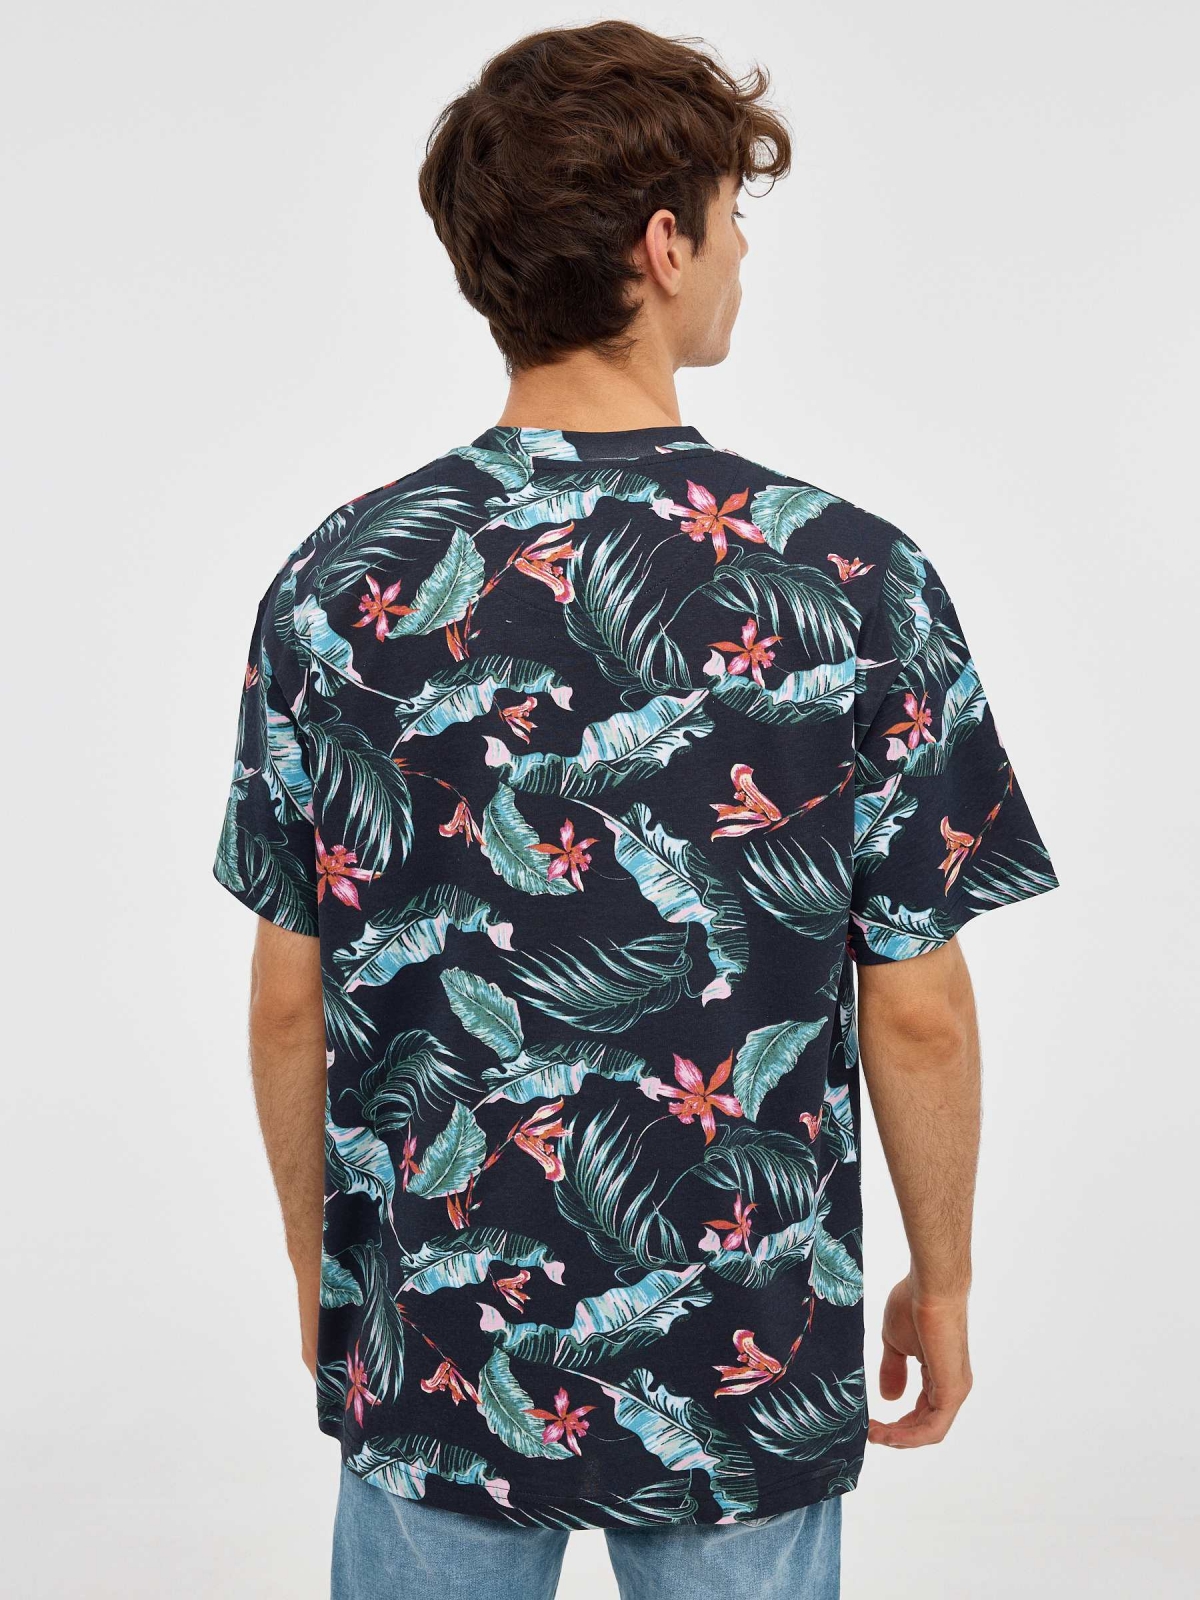 Tropical oversized t-shirt black middle front view